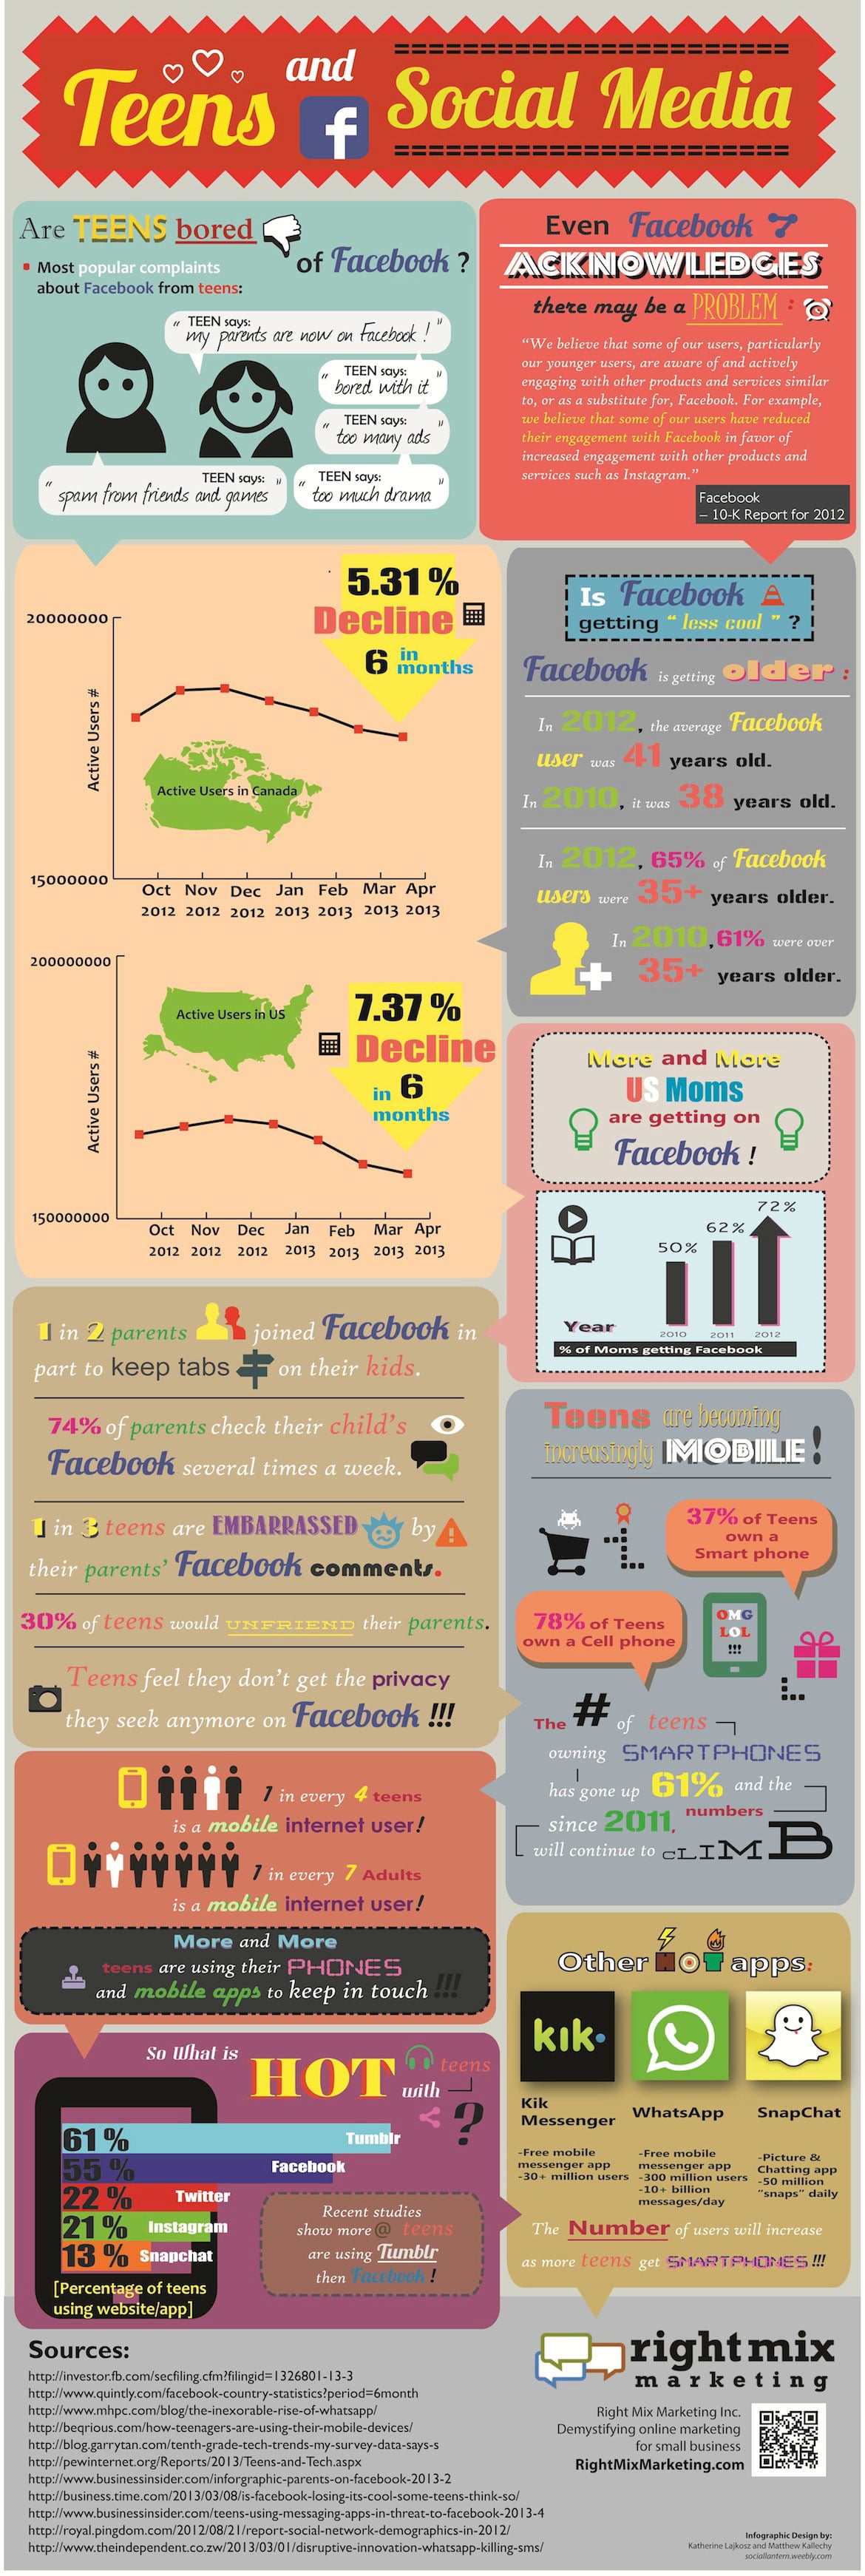 Teenagers And Facebook: The Appeal Is Wearing Off [Infographic]